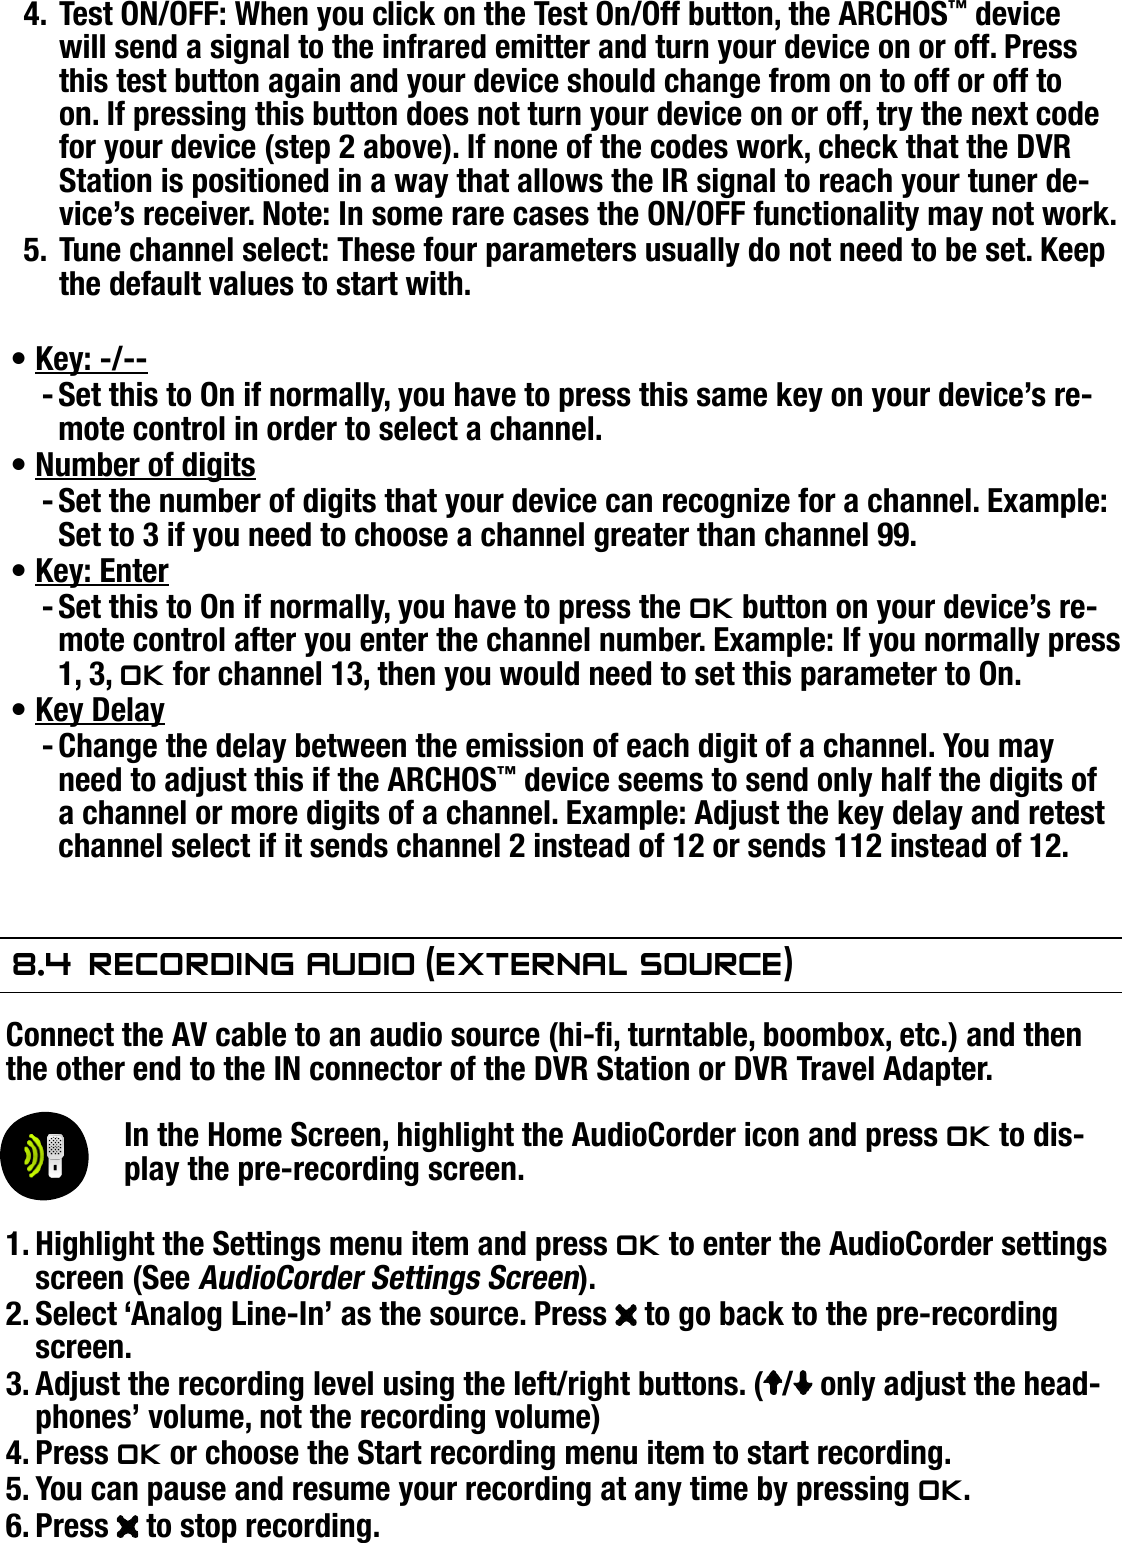 504/604MANUAL V2.0OPTIONAL FUNCTIONALITIES   &gt;   p. 54Test ON/OFF: When you click on the Test On/Off button, the ARCHOS™ device will send a signal to the infrared emitter and turn your device on or off. Press this test button again and your device should change from on to off or off to on. If pressing this button does not turn your device on or off, try the next code for your device (step 2 above). If none of the codes work, check that the DVR Station is positioned in a way that allows the IR signal to reach your tuner de-vice’s receiver. Note: In some rare cases the ON/OFF functionality may not work.Tune channel select: These four parameters usually do not need to be set. Keep the default values to start with.Key: -/--Set this to On if normally, you have to press this same key on your device’s re-mote control in order to select a channel.Number of digitsSet the number of digits that your device can recognize for a channel. Example: Set to 3 if you need to choose a channel greater than channel 99.Key: EnterSet this to On if normally, you have to press the OK button on your device’s re-mote control after you enter the channel number. Example: If you normally press 1, 3, OK for channel 13, then you would need to set this parameter to On.Key DelayChange the delay between the emission of each digit of a channel. You may need to adjust this if the ARCHOS™ device seems to send only half the digits of a channel or more digits of a channel. Example: Adjust the key delay and retest channel select if it sends channel 2 instead of 12 or sends 112 instead of 12.8.4  reCOrdIng audIO (exTernal sOurCe)Connect the AV cable to an audio source (hi-, turntable, boombox, etc.) and then the other end to the IN connector of the DVR Station or DVR Travel Adapter.In the Home Screen, highlight the AudioCorder icon and press OK to dis-play the pre-recording screen.Highlight the Settings menu item and press OK to enter the AudioCorder settings screen (See AudioCorder Settings Screen).Select ‘Analog Line-In’ as the source. Press   to go back to the pre-recording screen.Adjust the recording level using the left/right buttons. ( /  only adjust the head-phones’ volume, not the recording volume)Press OK or choose the Start recording menu item to start recording.You can pause and resume your recording at any time by pressing OK.Press   to stop recording.4.5.•-•-•-•-1.2.3.4.5.6.